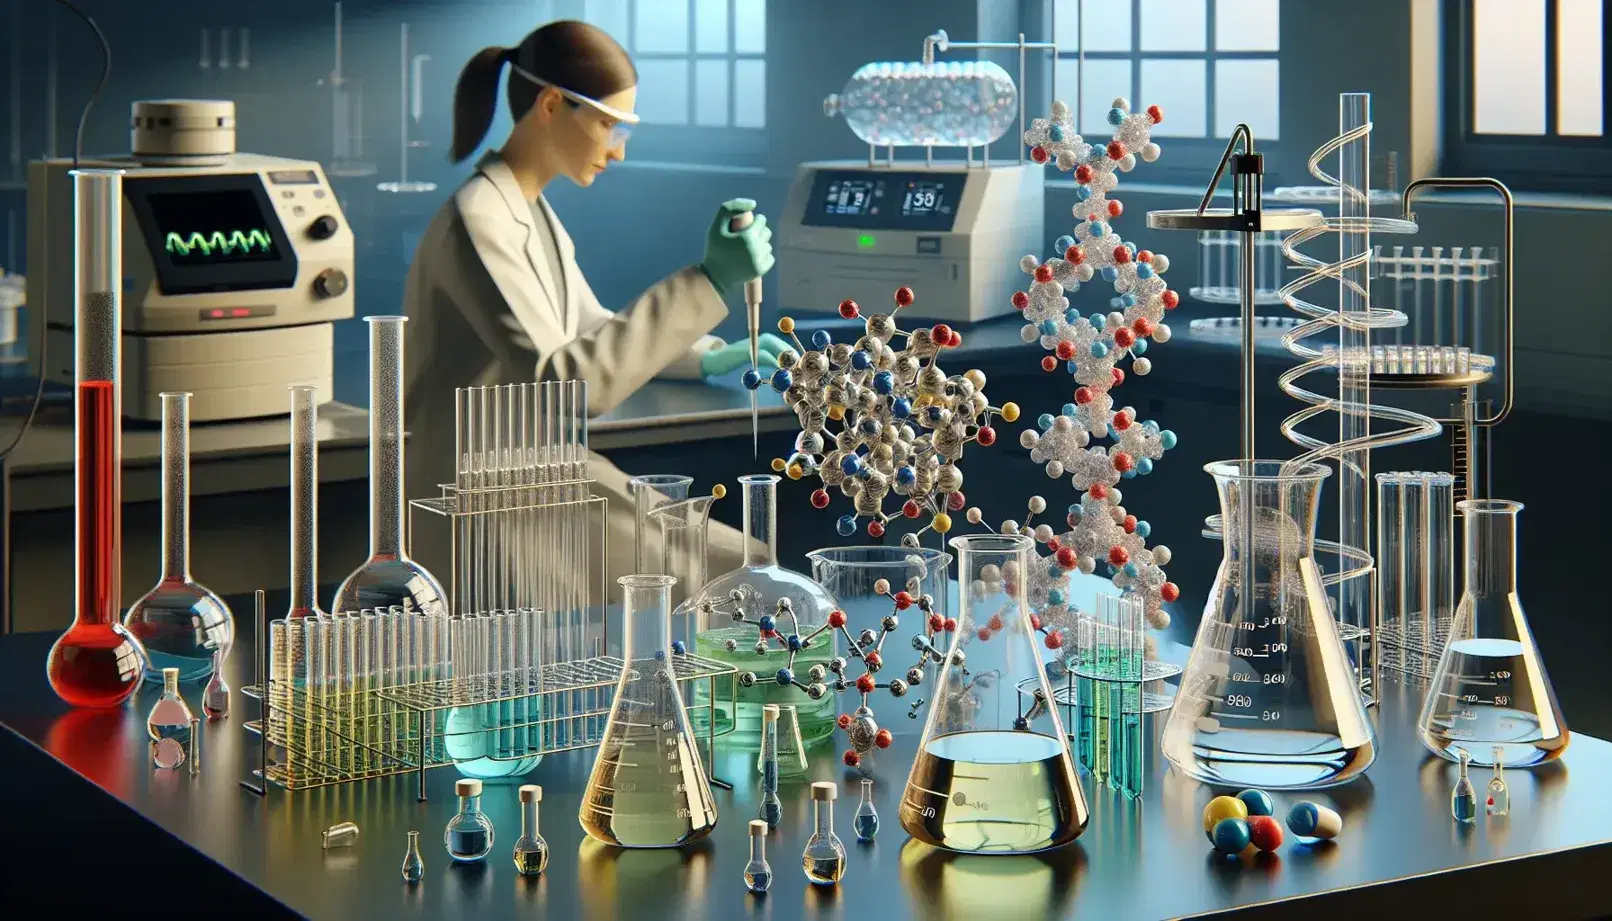 Laboratory with central bench, scientific glassware, bottles with colored liquids, protein crystal model and scientist at work.